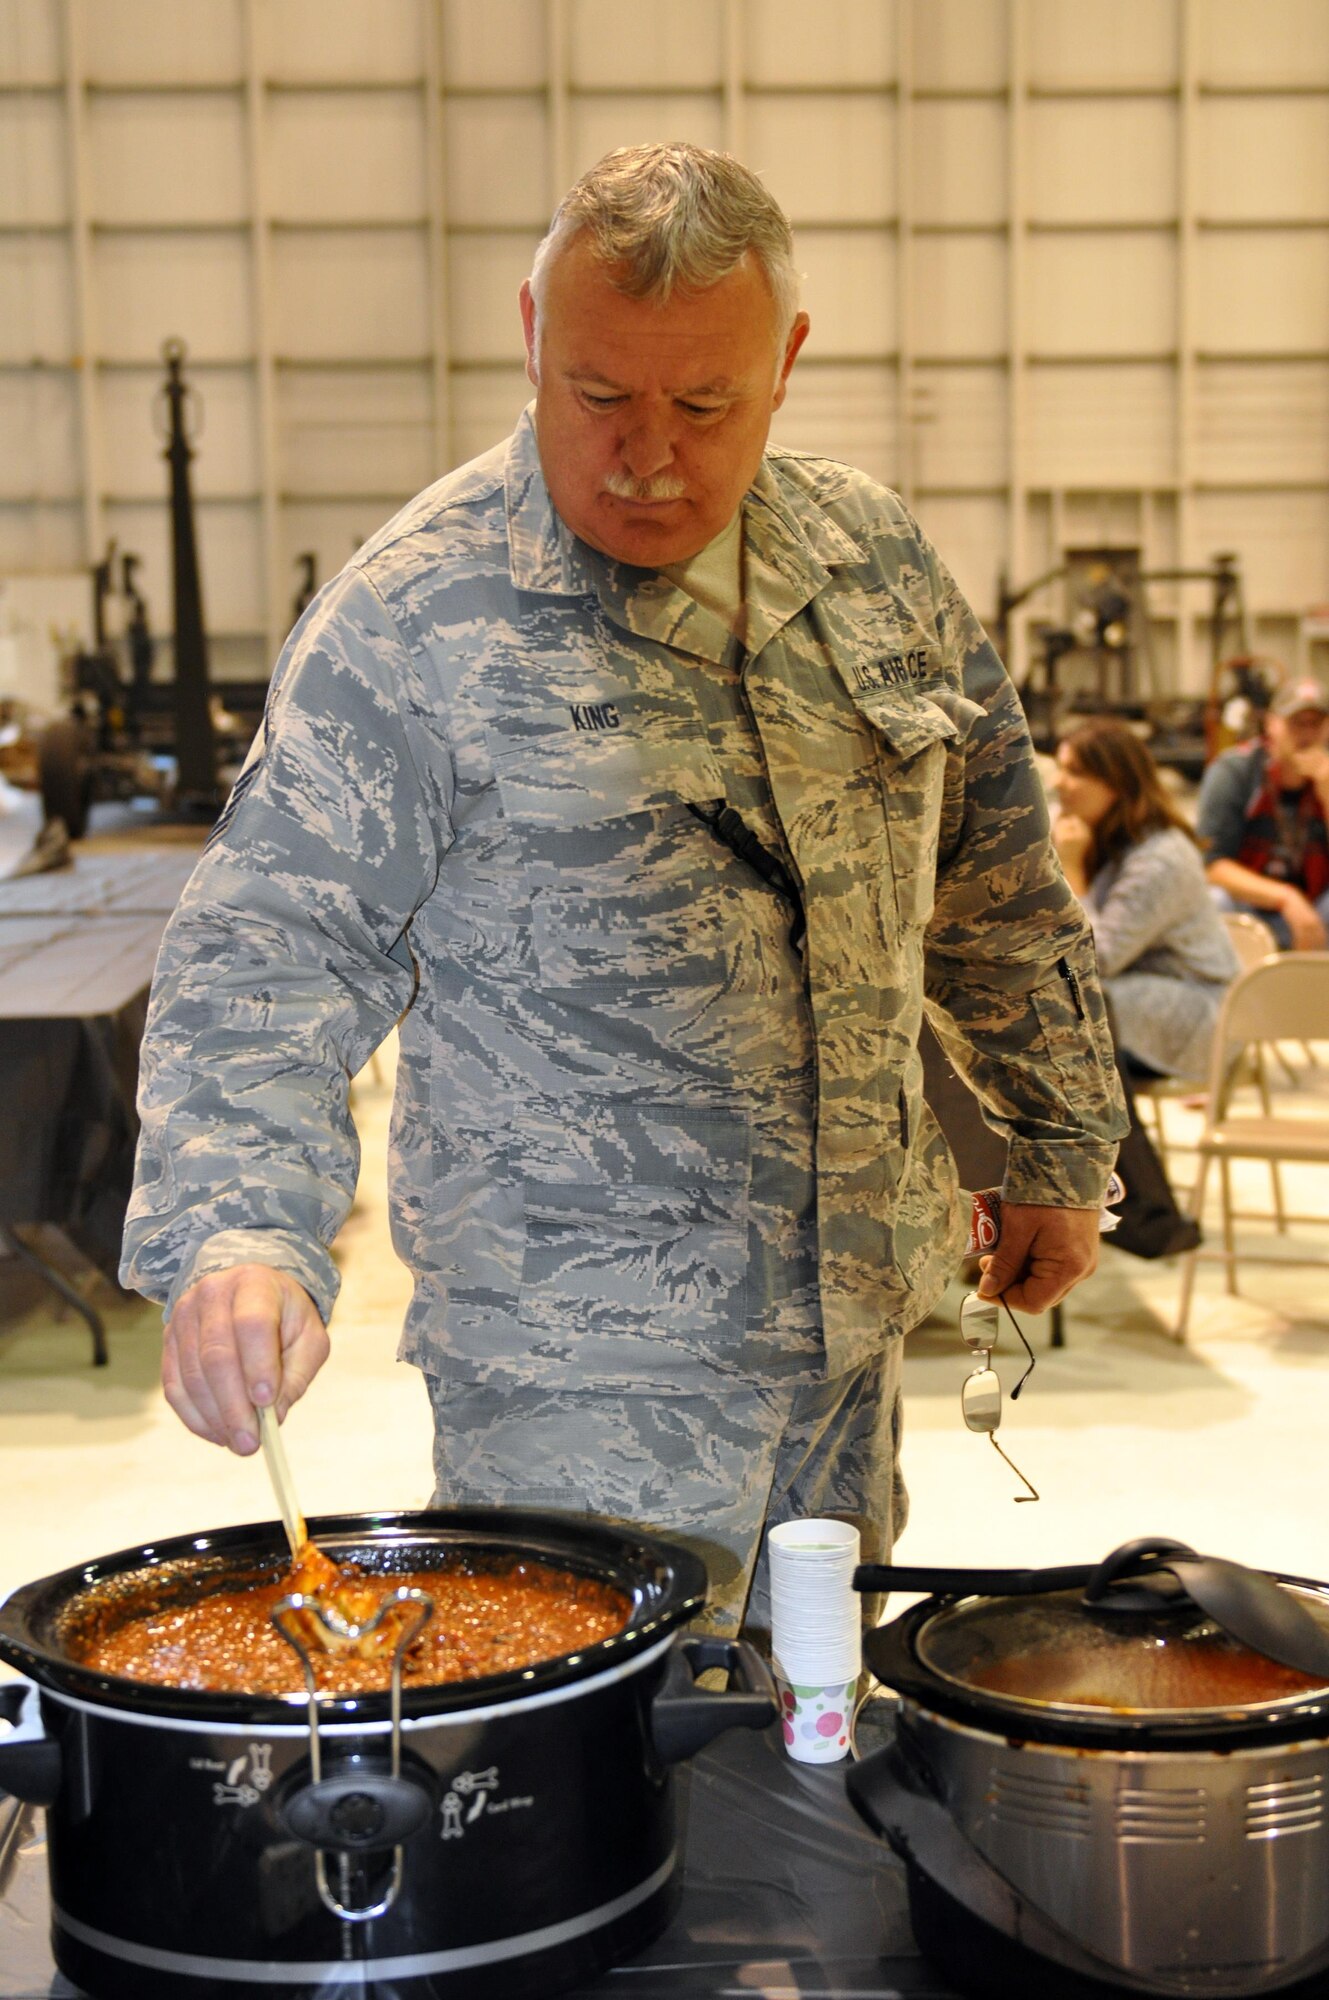 Master Sgt. Gregory King, 445th Maintenance Squadron HSC section chief, gives his pot of chili one final stir before the judging began for the 445th Airlift Wing’s 16th Annual Chili Cook-off Oct. 27, 2016. King won first place in the chili cook-off for his chili titiled, “Southeastern Ohio Inspired Chili.” The event raised $400 for the Combined Federal Campaign. (U.S. Air Force photo/Stacy Vaughn)